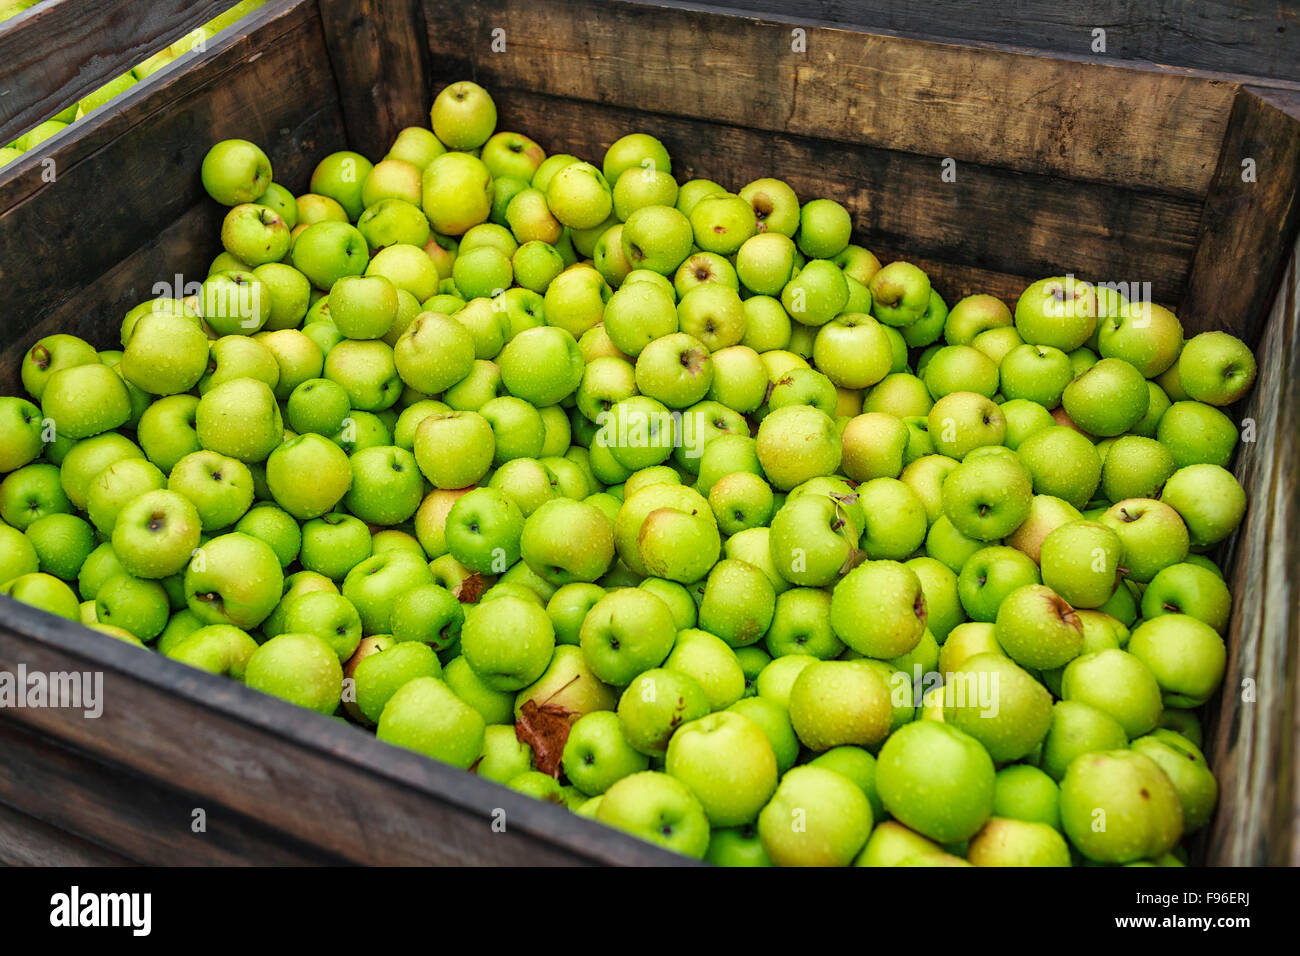 Granny Smith apples in a wood bin, at a produce market, Eastern Townships, Quebec, Canada. Stock Photo